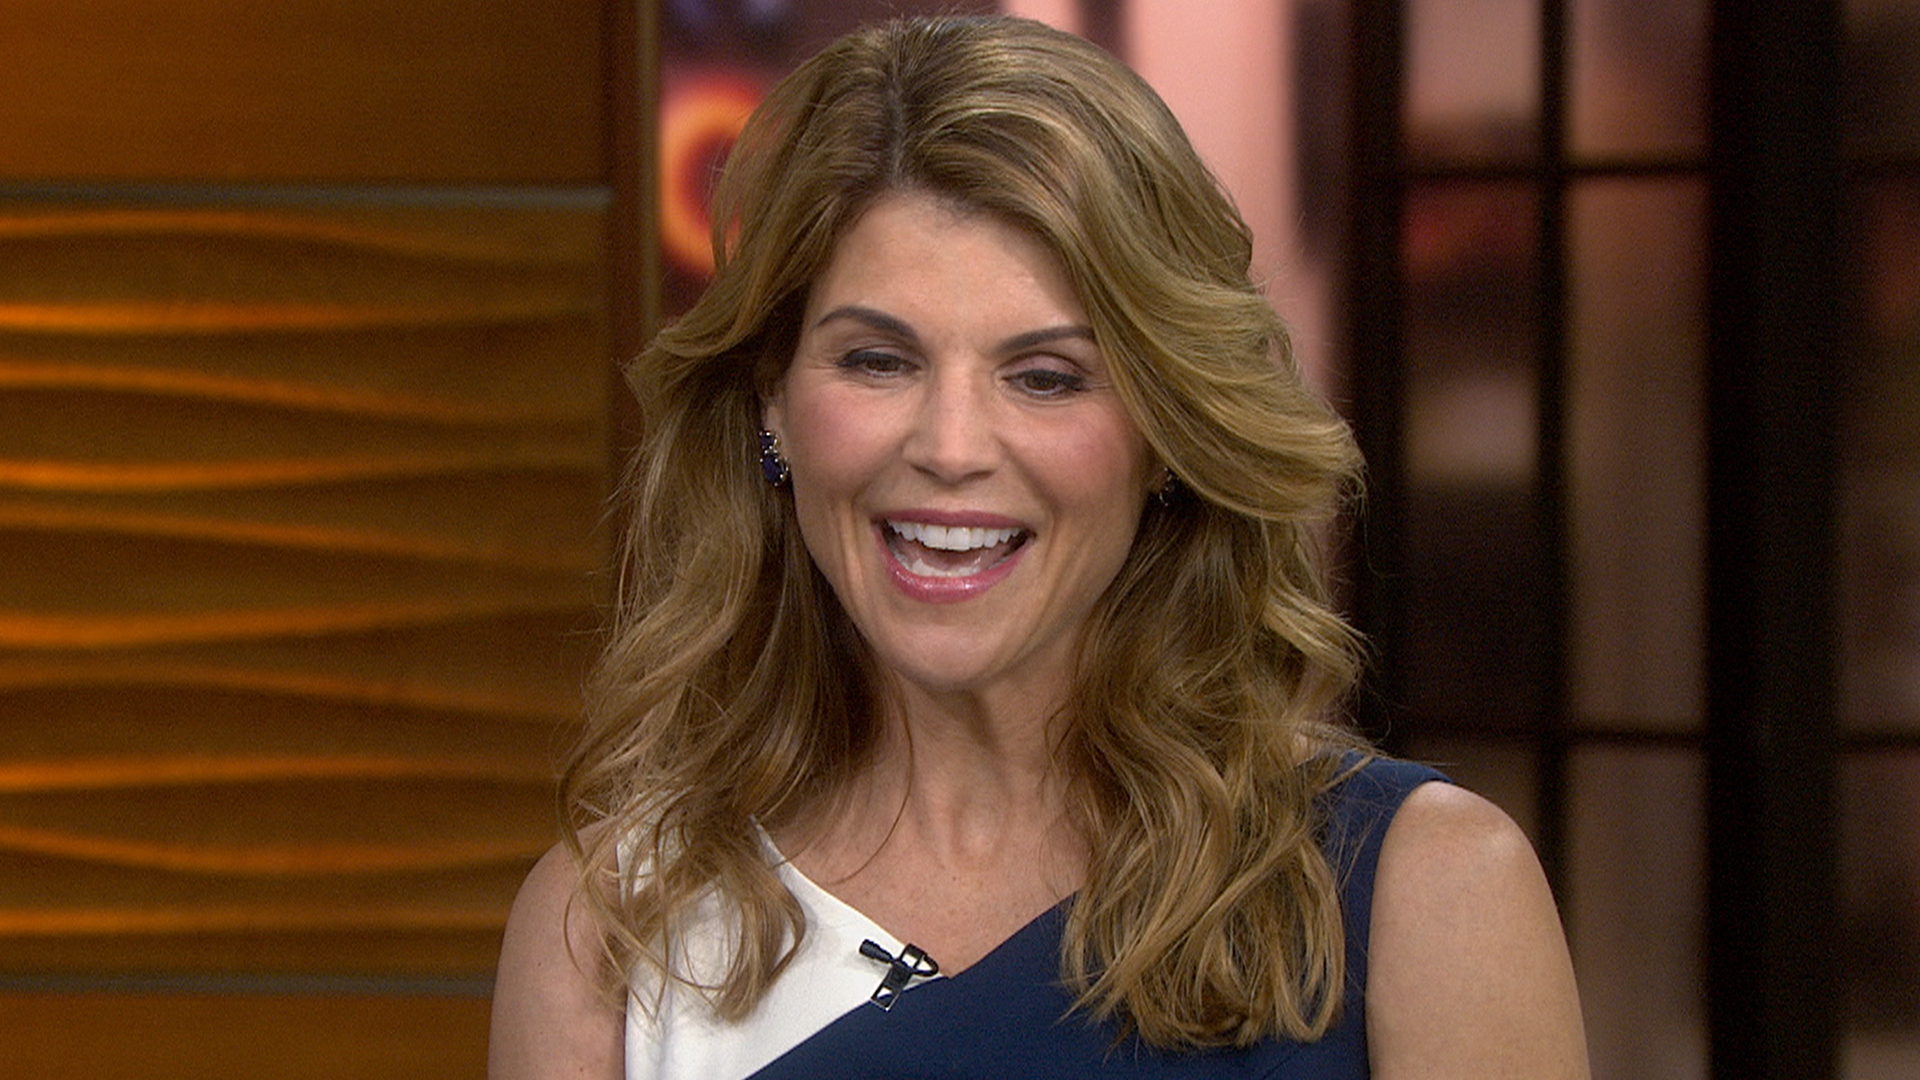 Lori Loughlin: I’m in talks for ‘Fuller House’ series - TODAY.com1920 x 1080